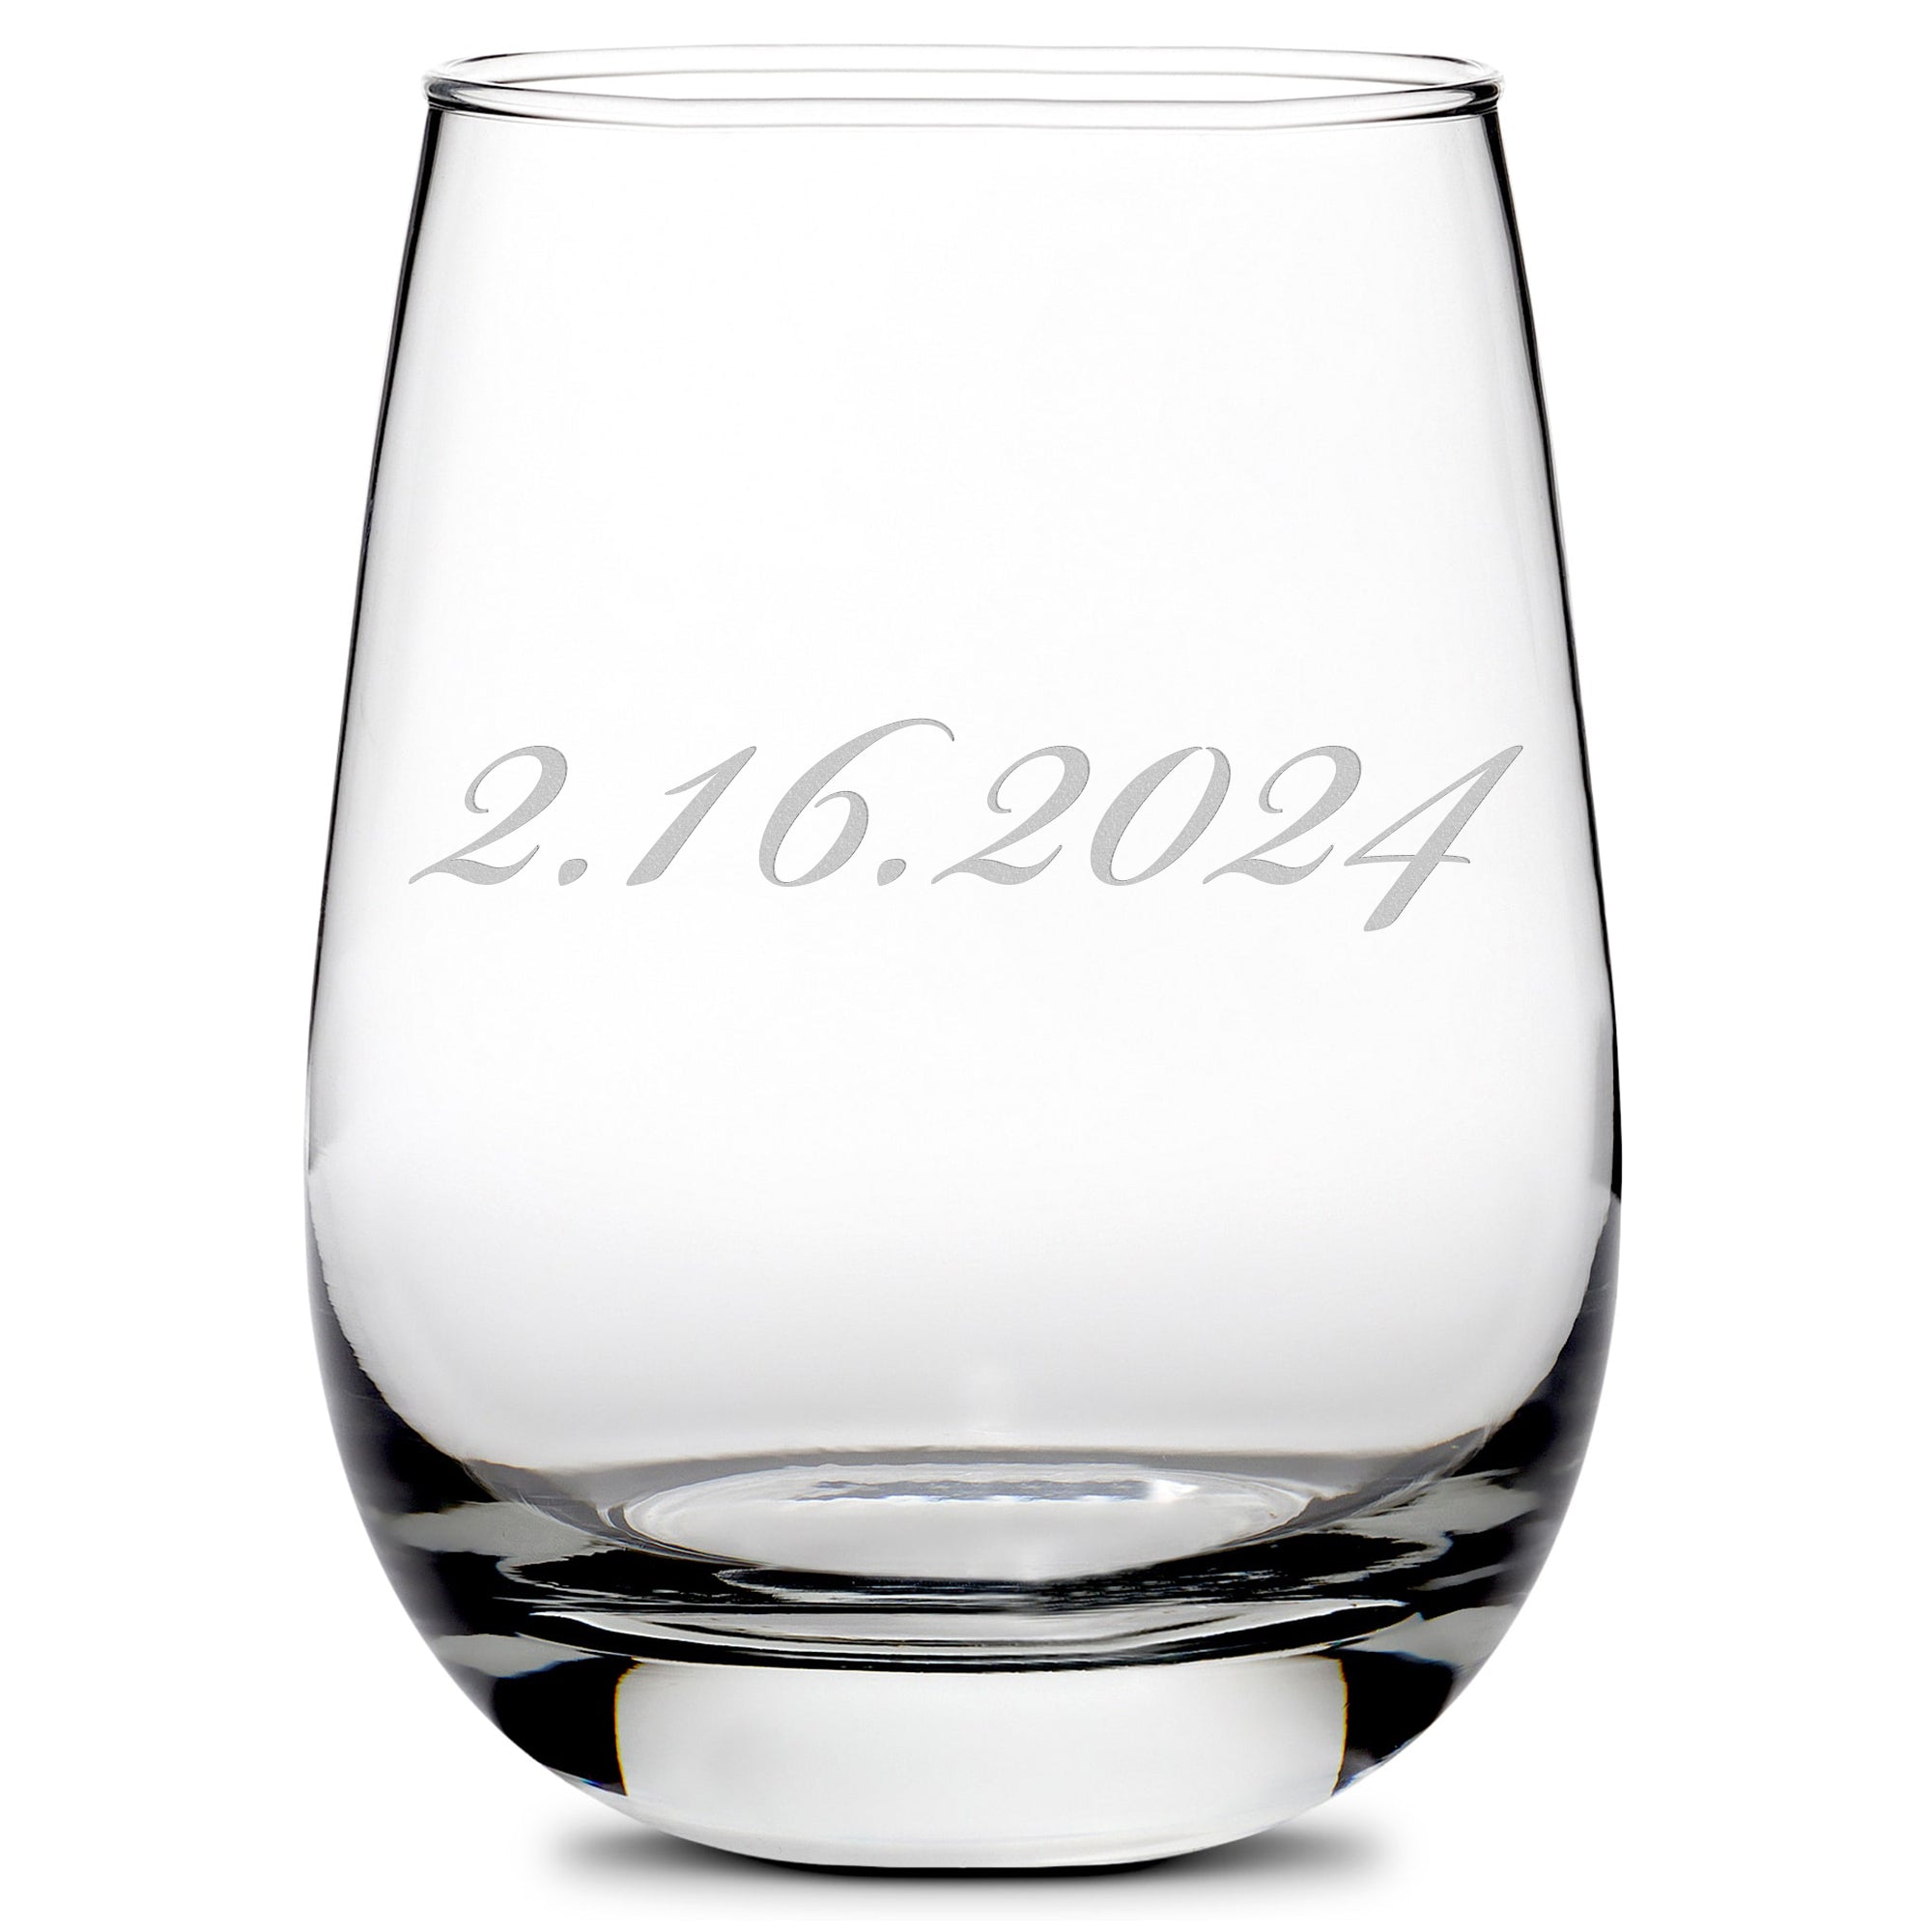 Customizable, Customizable Wedding Date, Handmade, Handblown, Hand Etched Gifts, Sand Carved 16oz